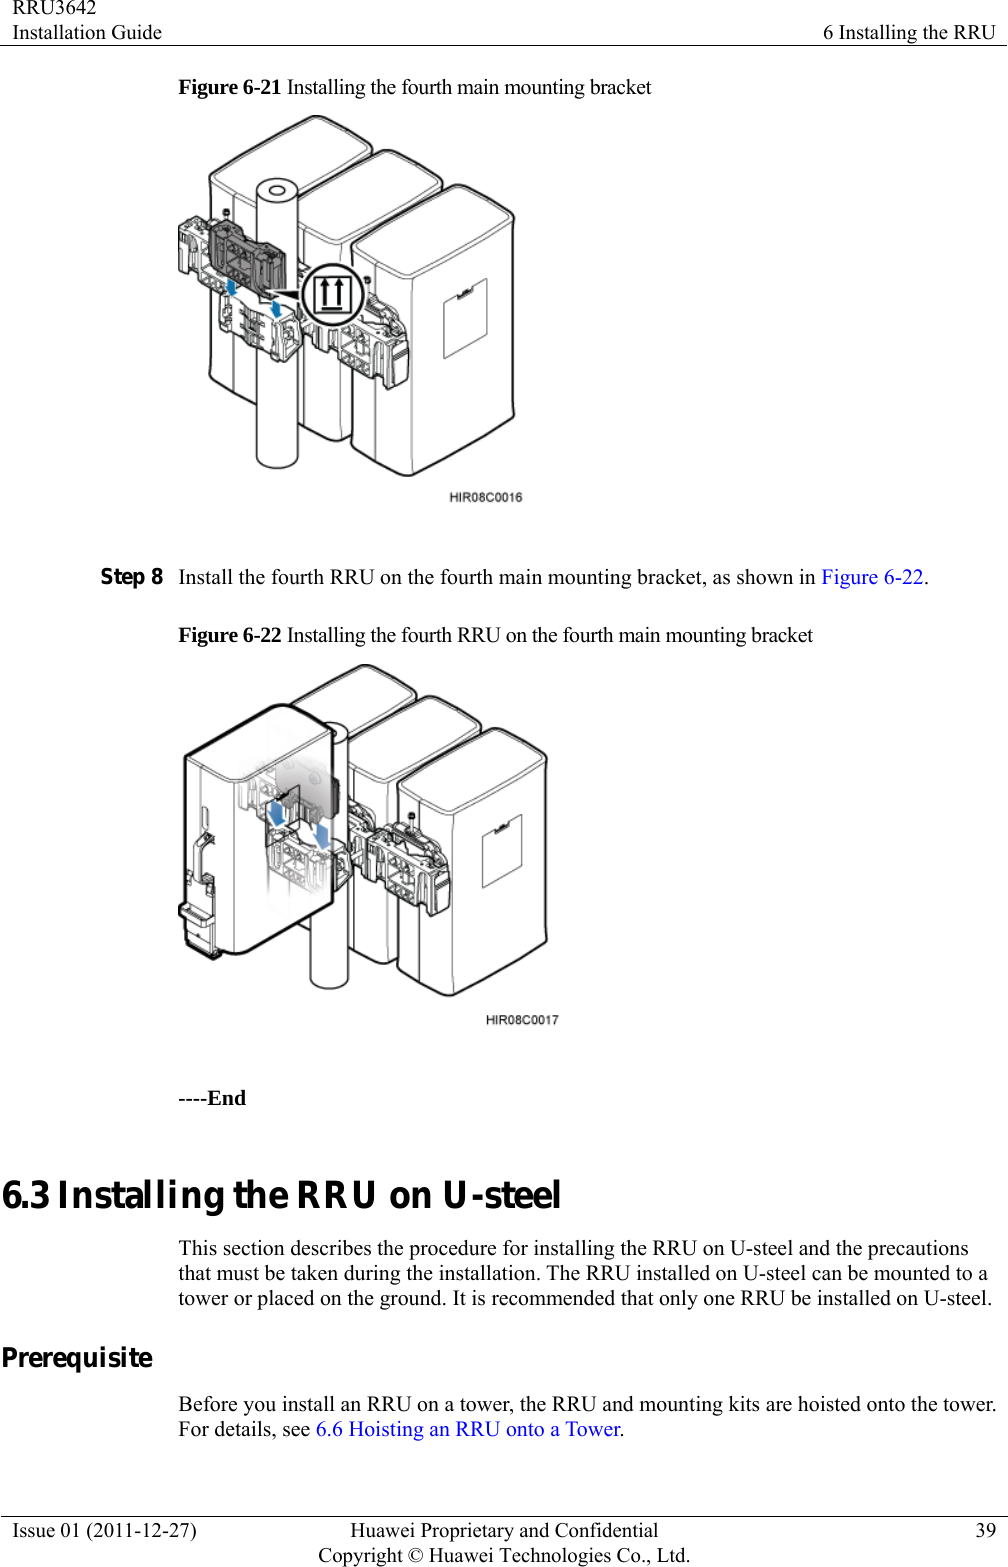 RRU3642 Installation Guide  6 Installing the RRU Issue 01 (2011-12-27)  Huawei Proprietary and Confidential         Copyright © Huawei Technologies Co., Ltd.39 Figure 6-21 Installing the fourth main mounting bracket   Step 8 Install the fourth RRU on the fourth main mounting bracket, as shown in Figure 6-22. Figure 6-22 Installing the fourth RRU on the fourth main mounting bracket   ----End 6.3 Installing the RRU on U-steel This section describes the procedure for installing the RRU on U-steel and the precautions that must be taken during the installation. The RRU installed on U-steel can be mounted to a tower or placed on the ground. It is recommended that only one RRU be installed on U-steel. Prerequisite Before you install an RRU on a tower, the RRU and mounting kits are hoisted onto the tower. For details, see 6.6 Hoisting an RRU onto a Tower. 